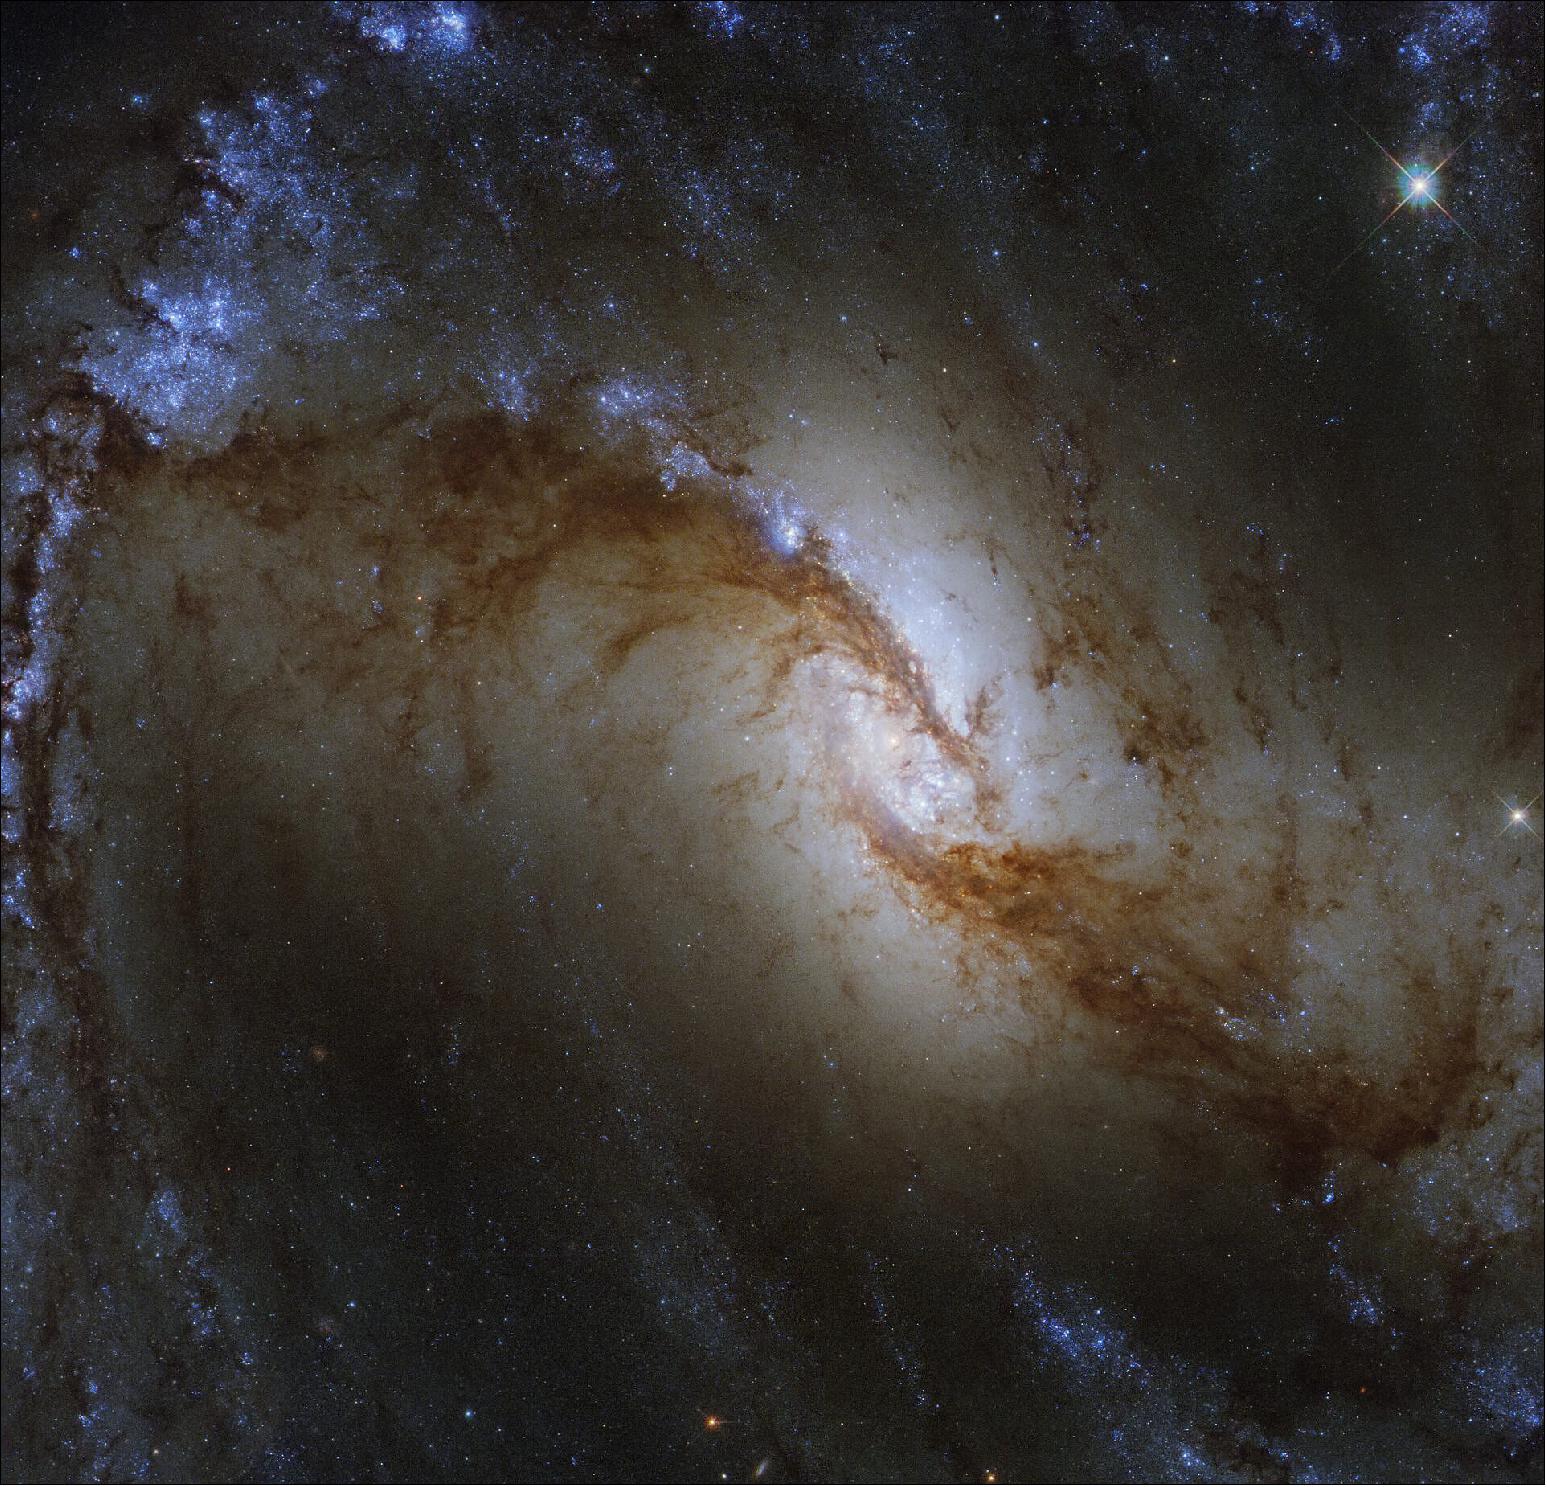 Figure 22: This Hubble image was captured as part of a joint survey with the Atacama Large Millimeter/submillimeter Array (ALMA) in Chile. The survey will help scientists understand how the diversity of galaxy environments observed in the nearby Universe, including NGC 1365 and previous ESA/Hubble Pictures of the Week such as NGC 2835 and NGC 2775, influence the formation of stars and star clusters. Expected to image over 100,000 gas clouds and star-forming regions beyond our Milky Way, the PHANGS survey is expected to uncover and clarify many of the links between cold gas clouds, star formation and the overall shape and morphology of galaxies [image credit: ESA/Hubble & NASA, J. Lee and the PHANGS-HST Team; CC BY 4.0 - Acknowledgement: Judy Schmidt (Geckzilla)]